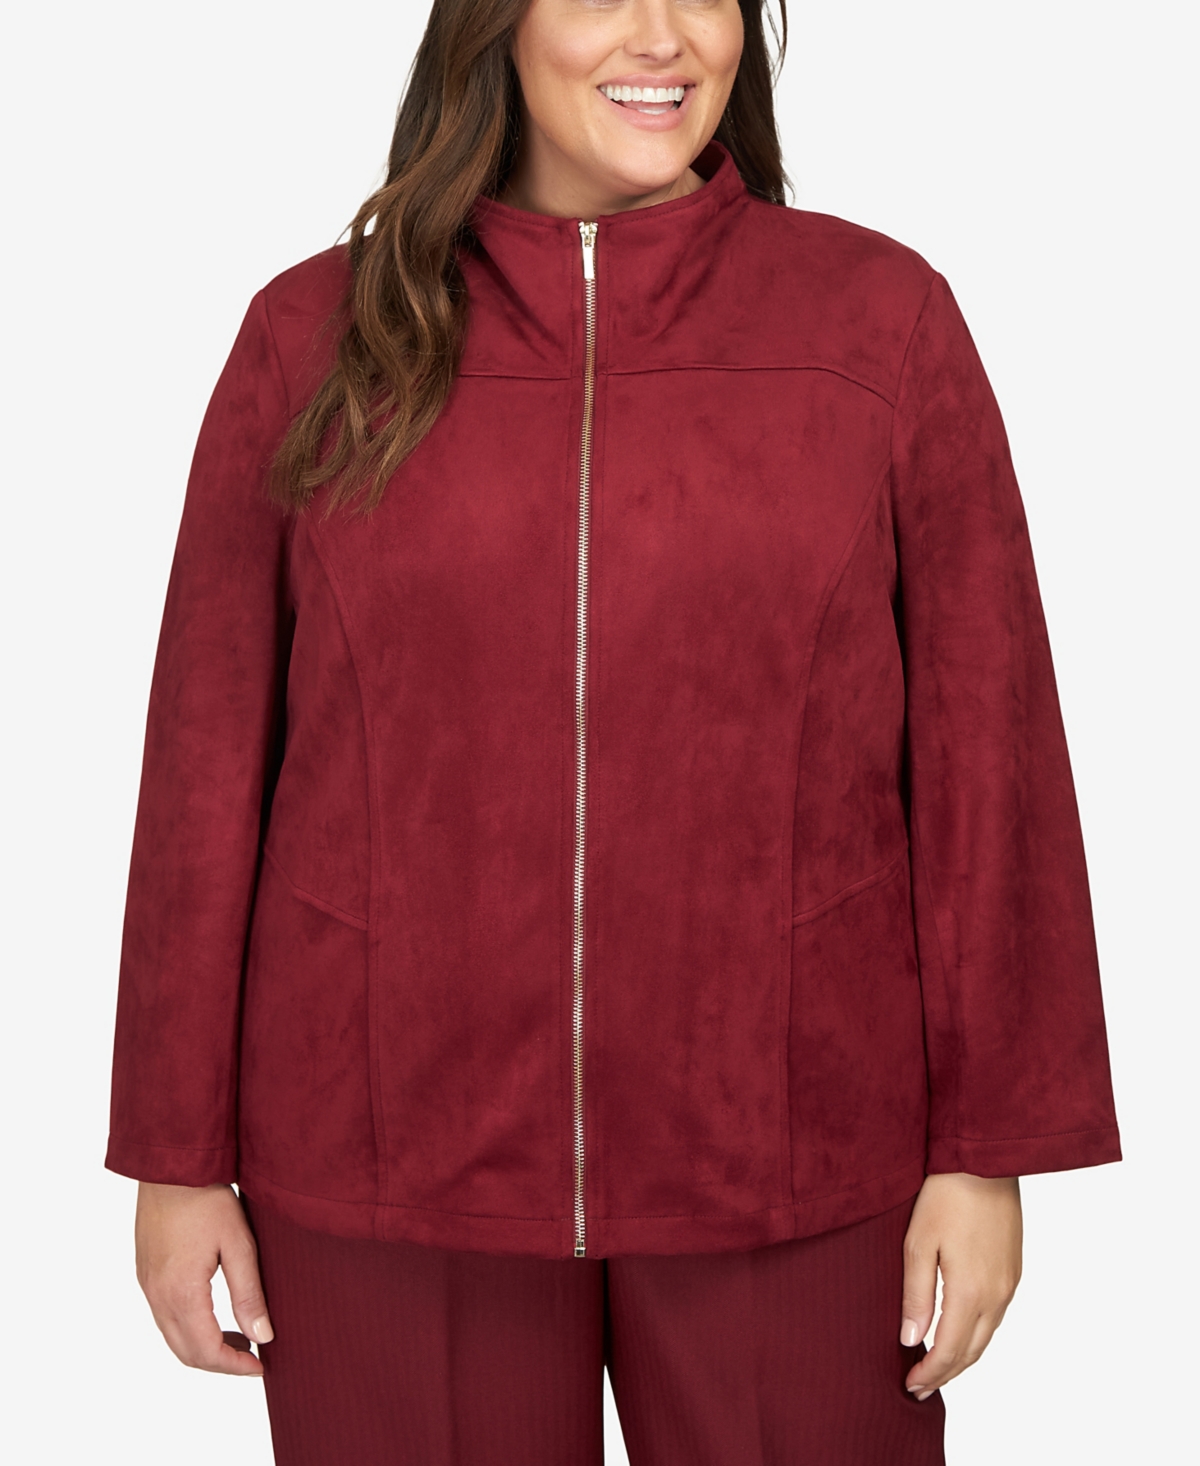 Alfred Dunner Plus Size Mulberry Street Paneled Suede Zip Up Jacket